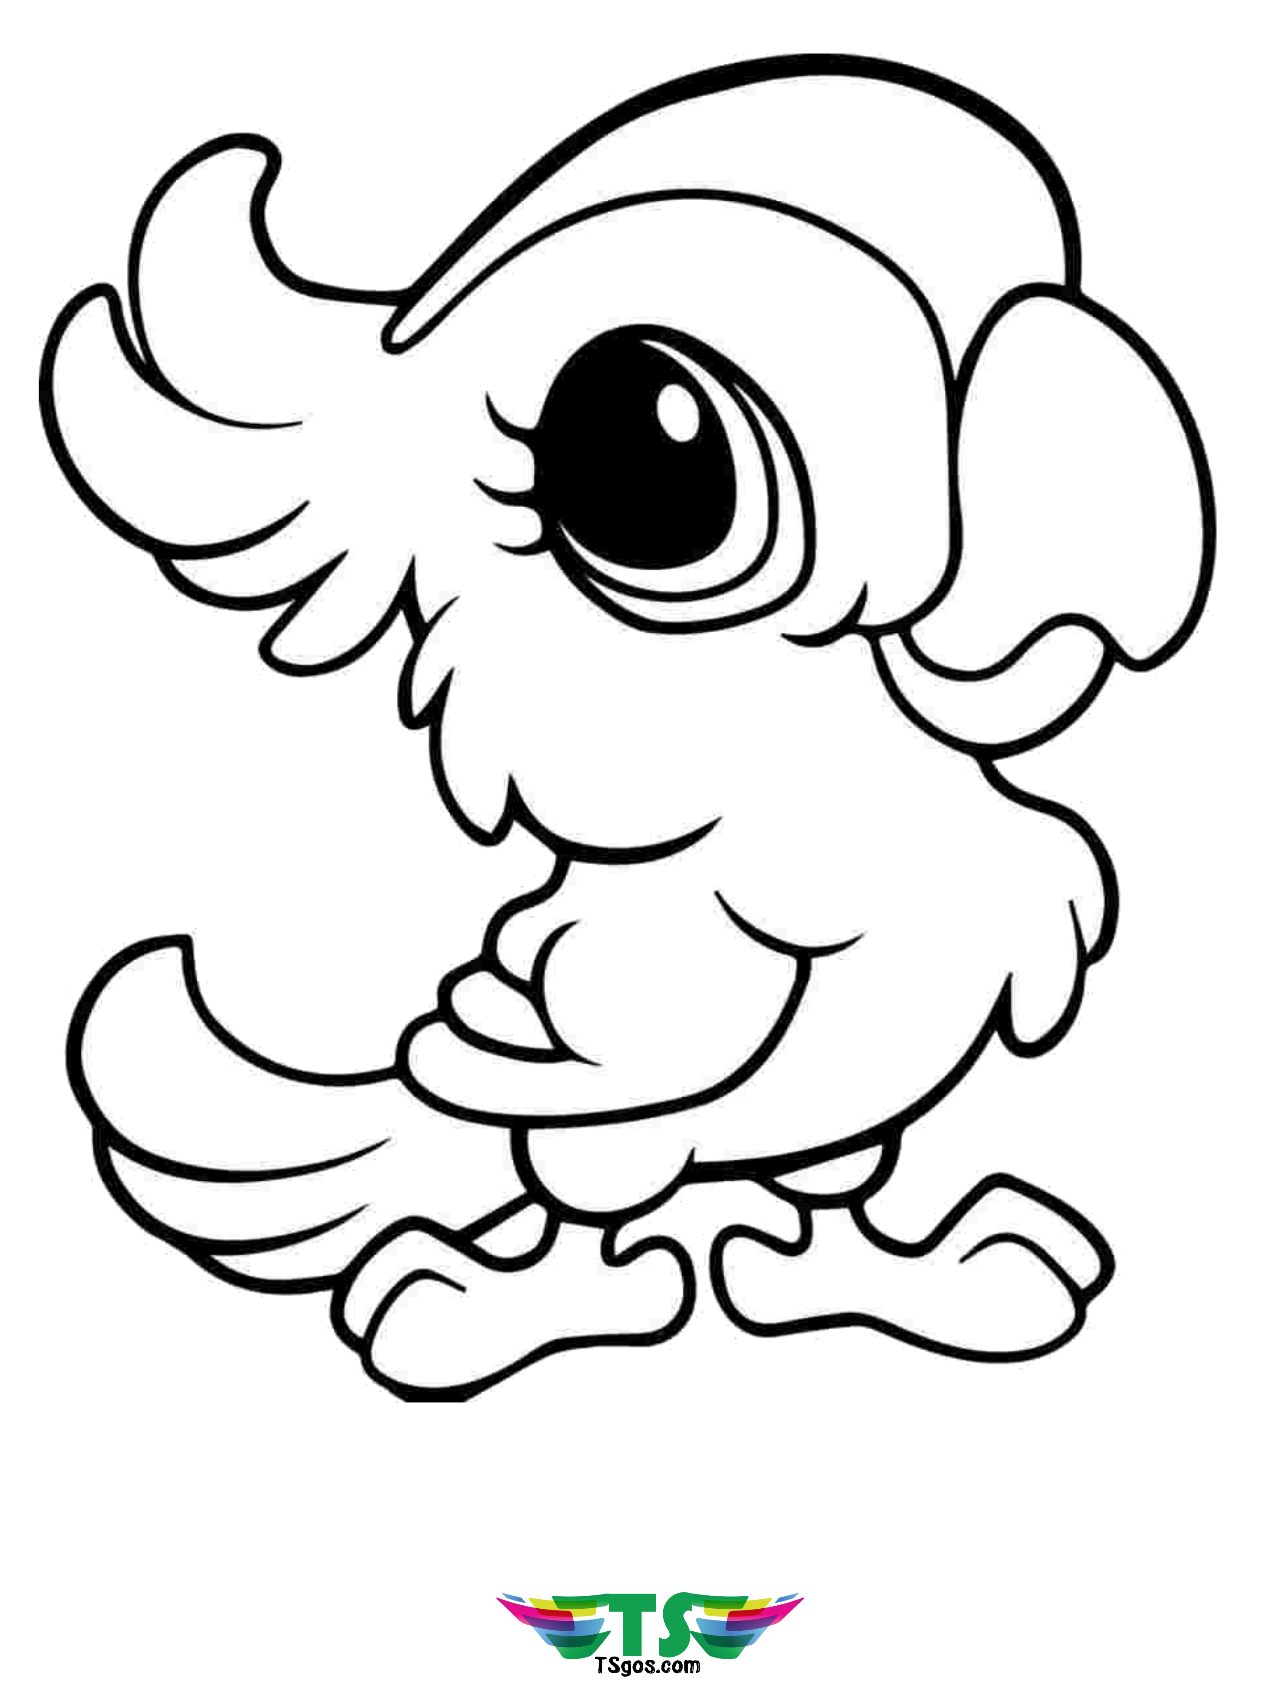 Cute bird coloring page for kids. - TSgos.com